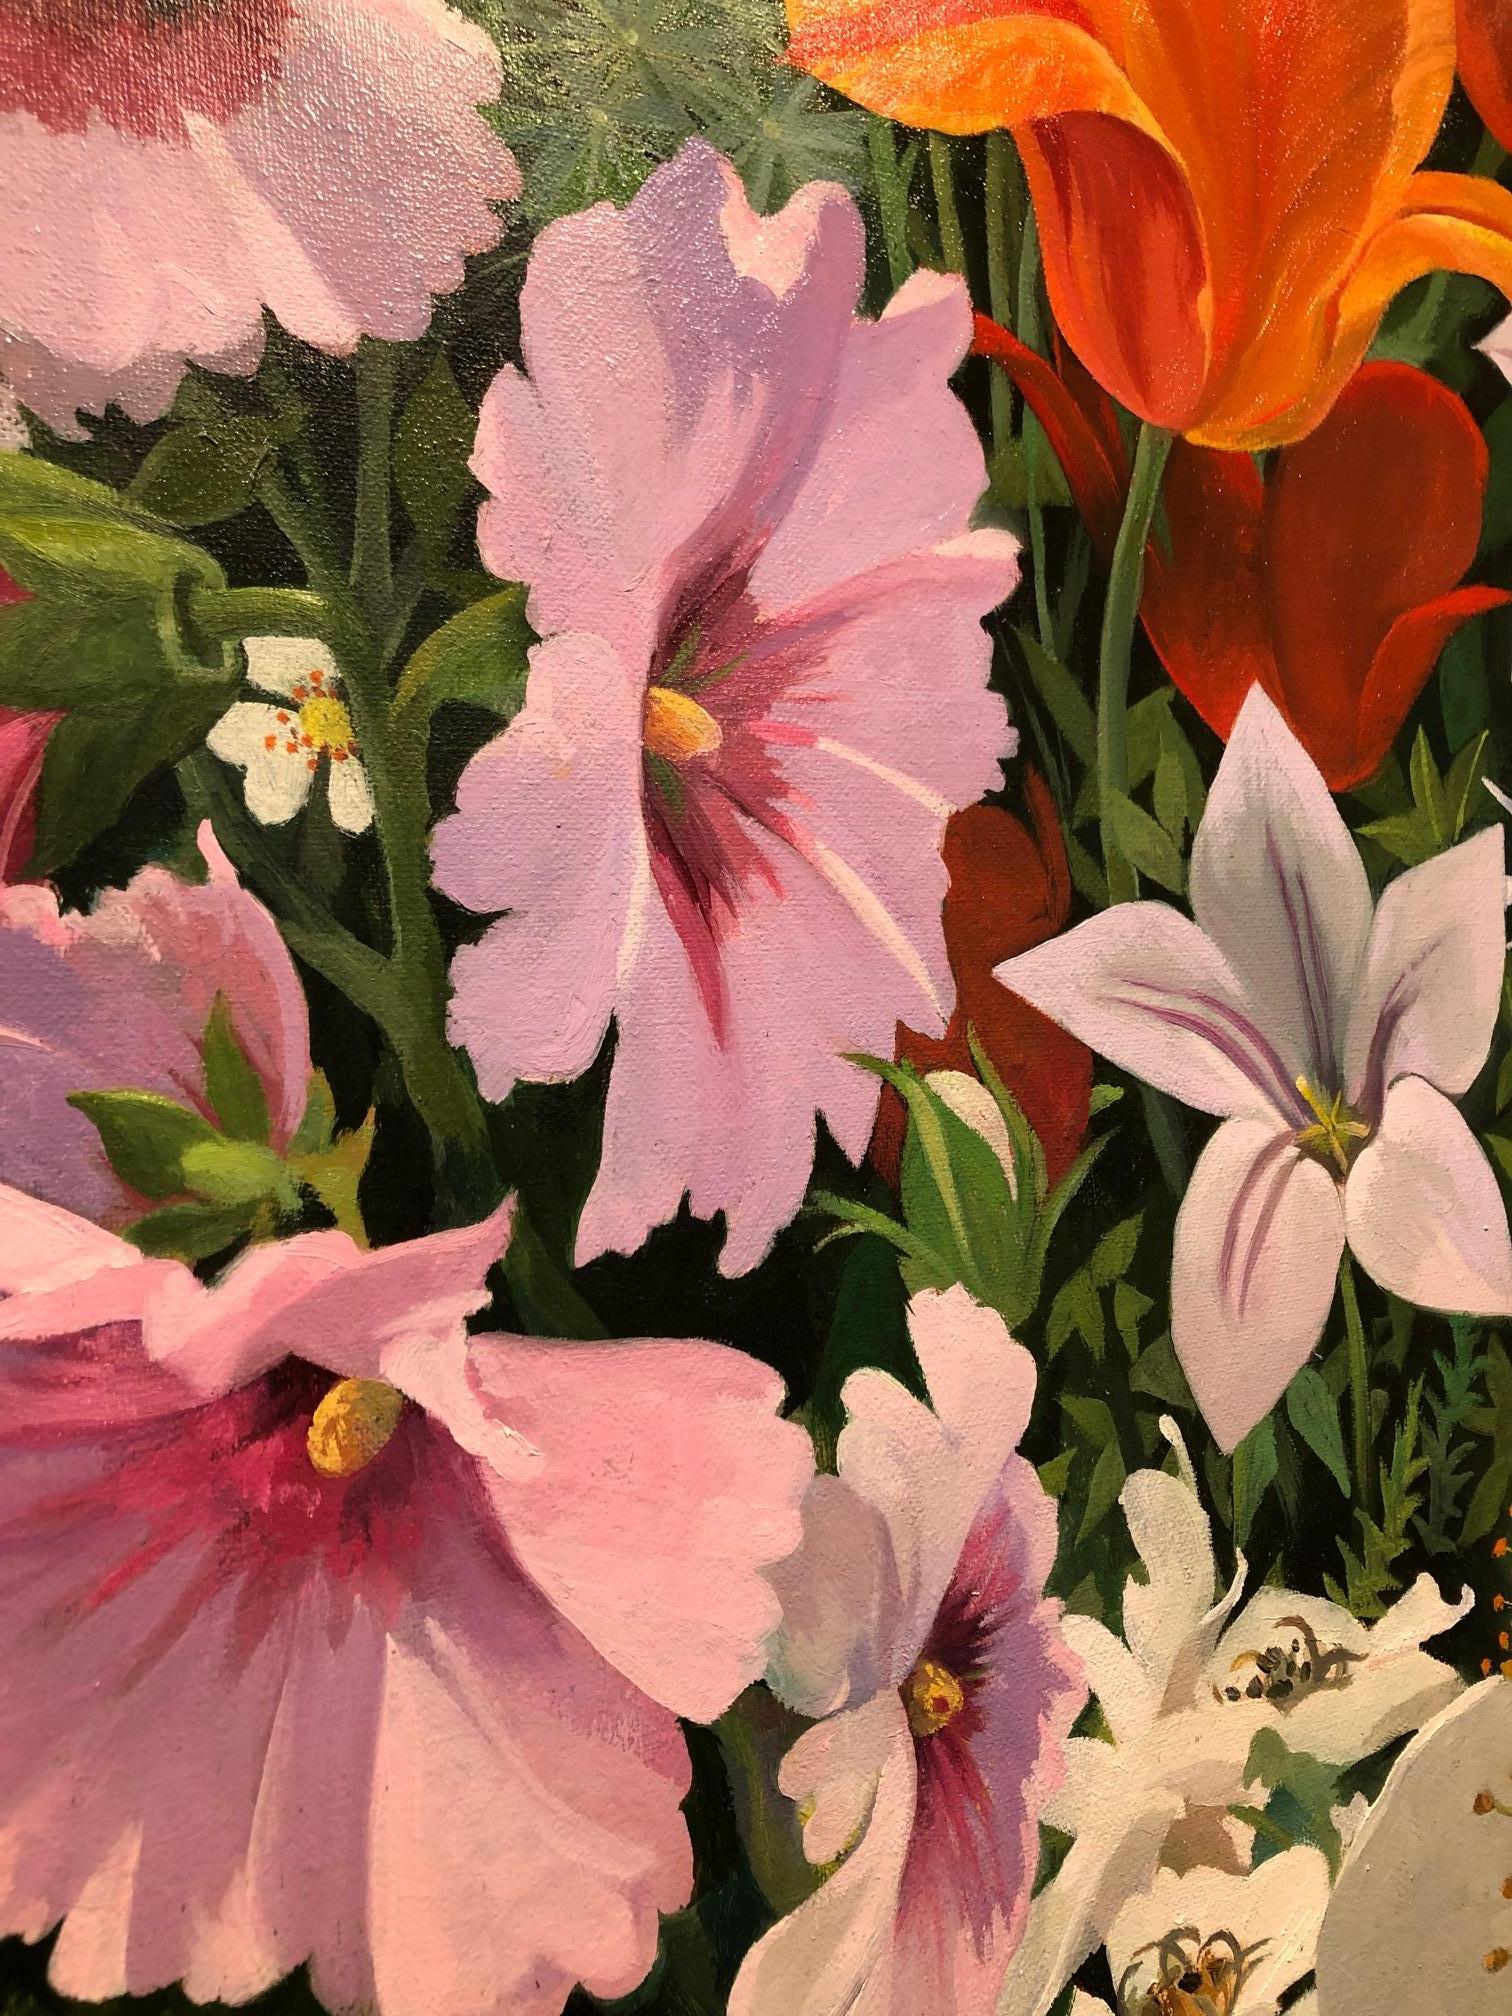 Susan Cohen draws inspiration from nature’s infinite variety and patterns. In vibrant oil and monochromatic walnut ink, her paintings combine observed and imagined reality through a keen, unsentimental lens. Often drawn to complex, highly structured